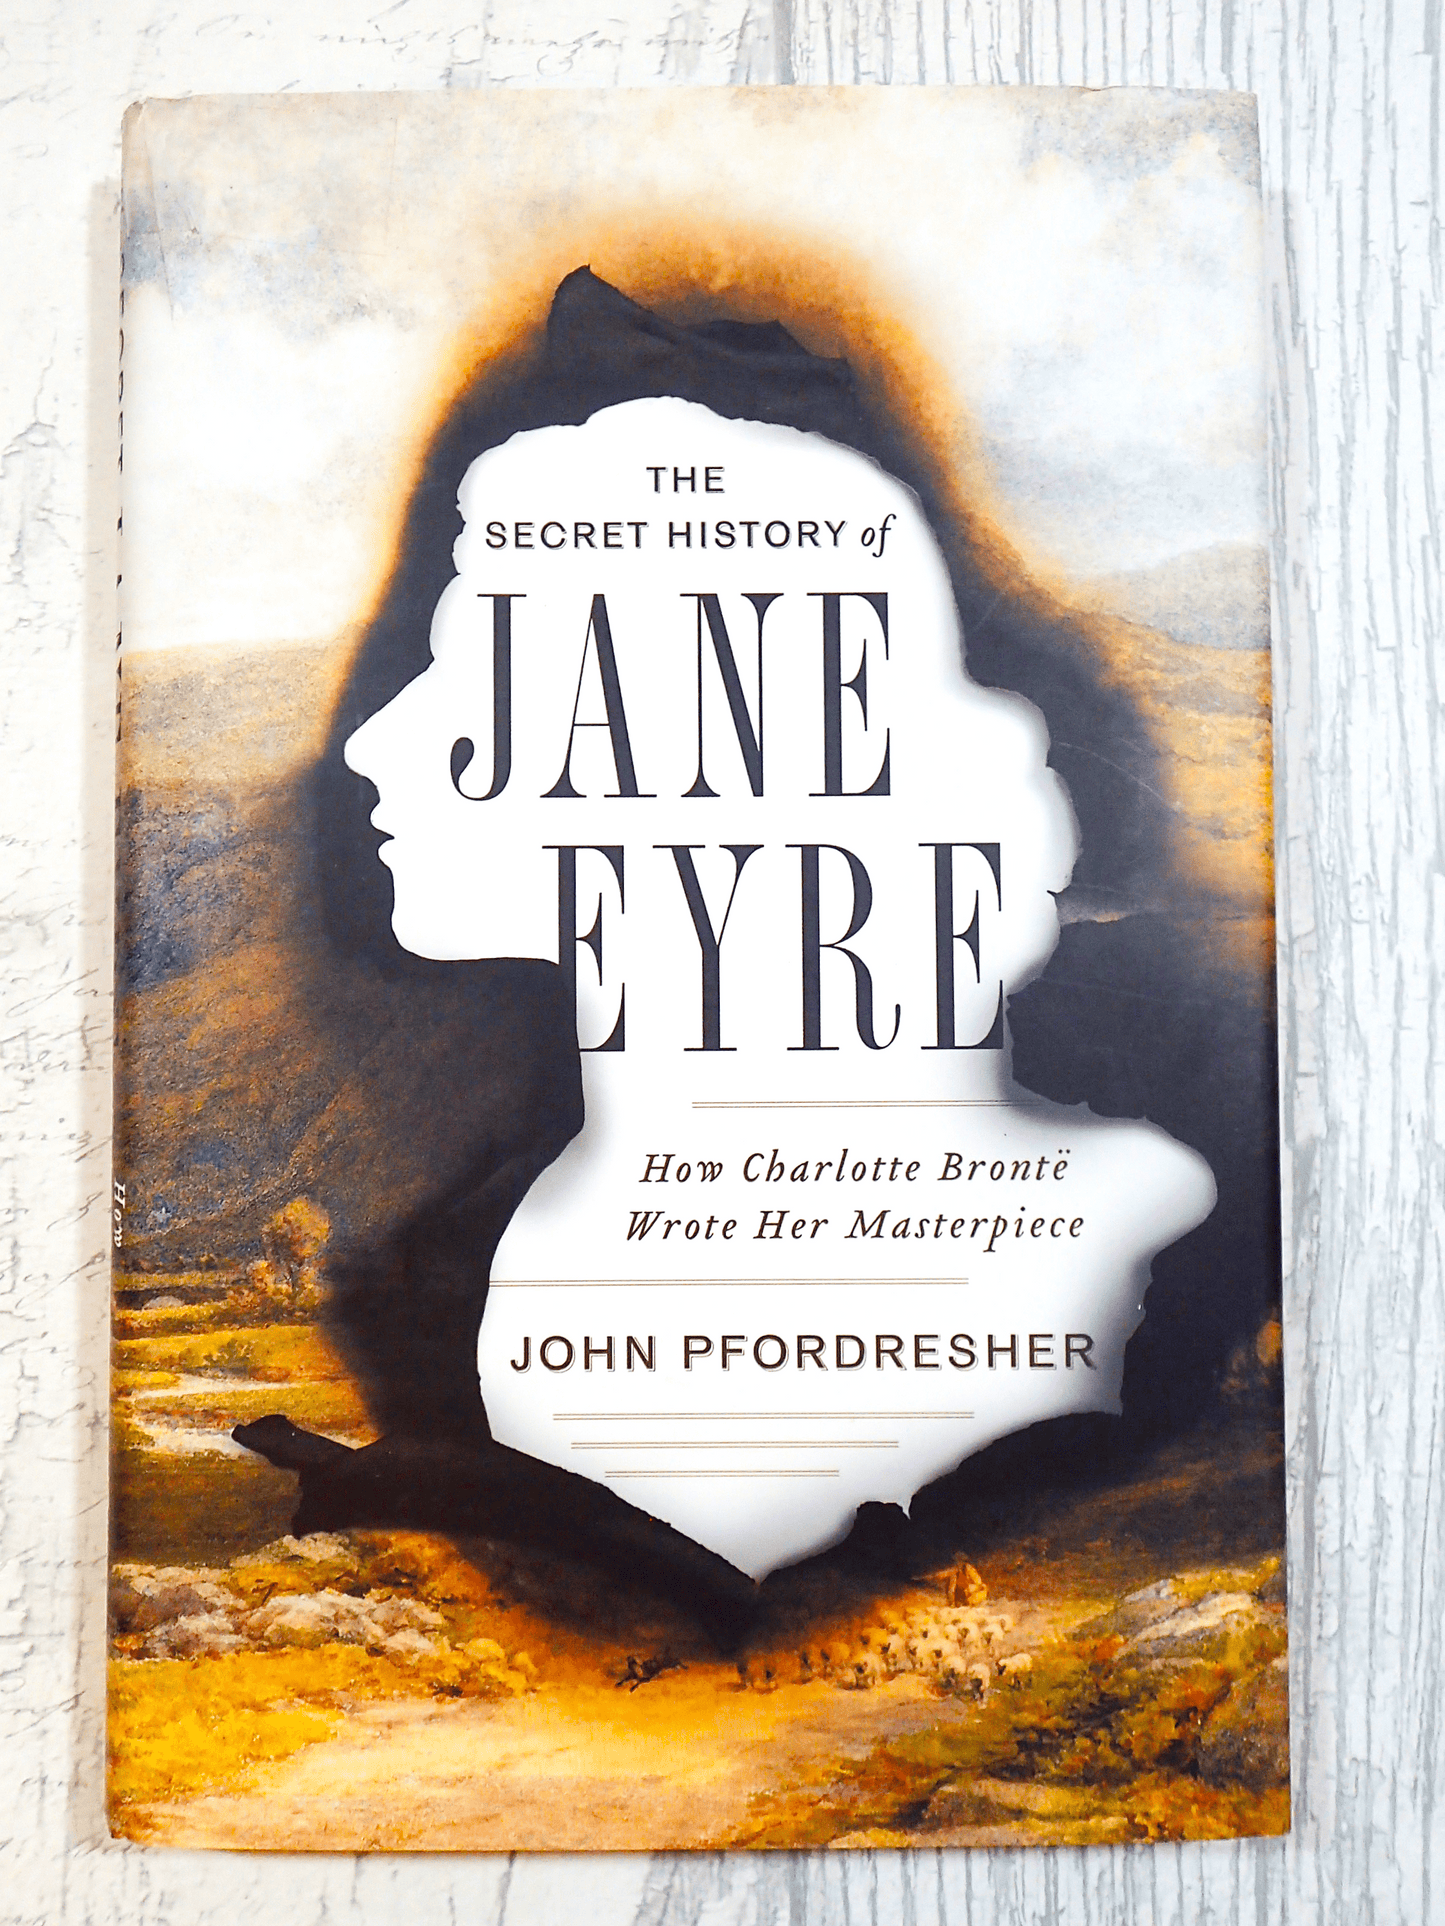 Front cover of The Secret History of Jane Eyre John Pfordresher Vintage Hardback First Edition showing silhouette of Jane Eyre burnt over image of moorland against a light background. 